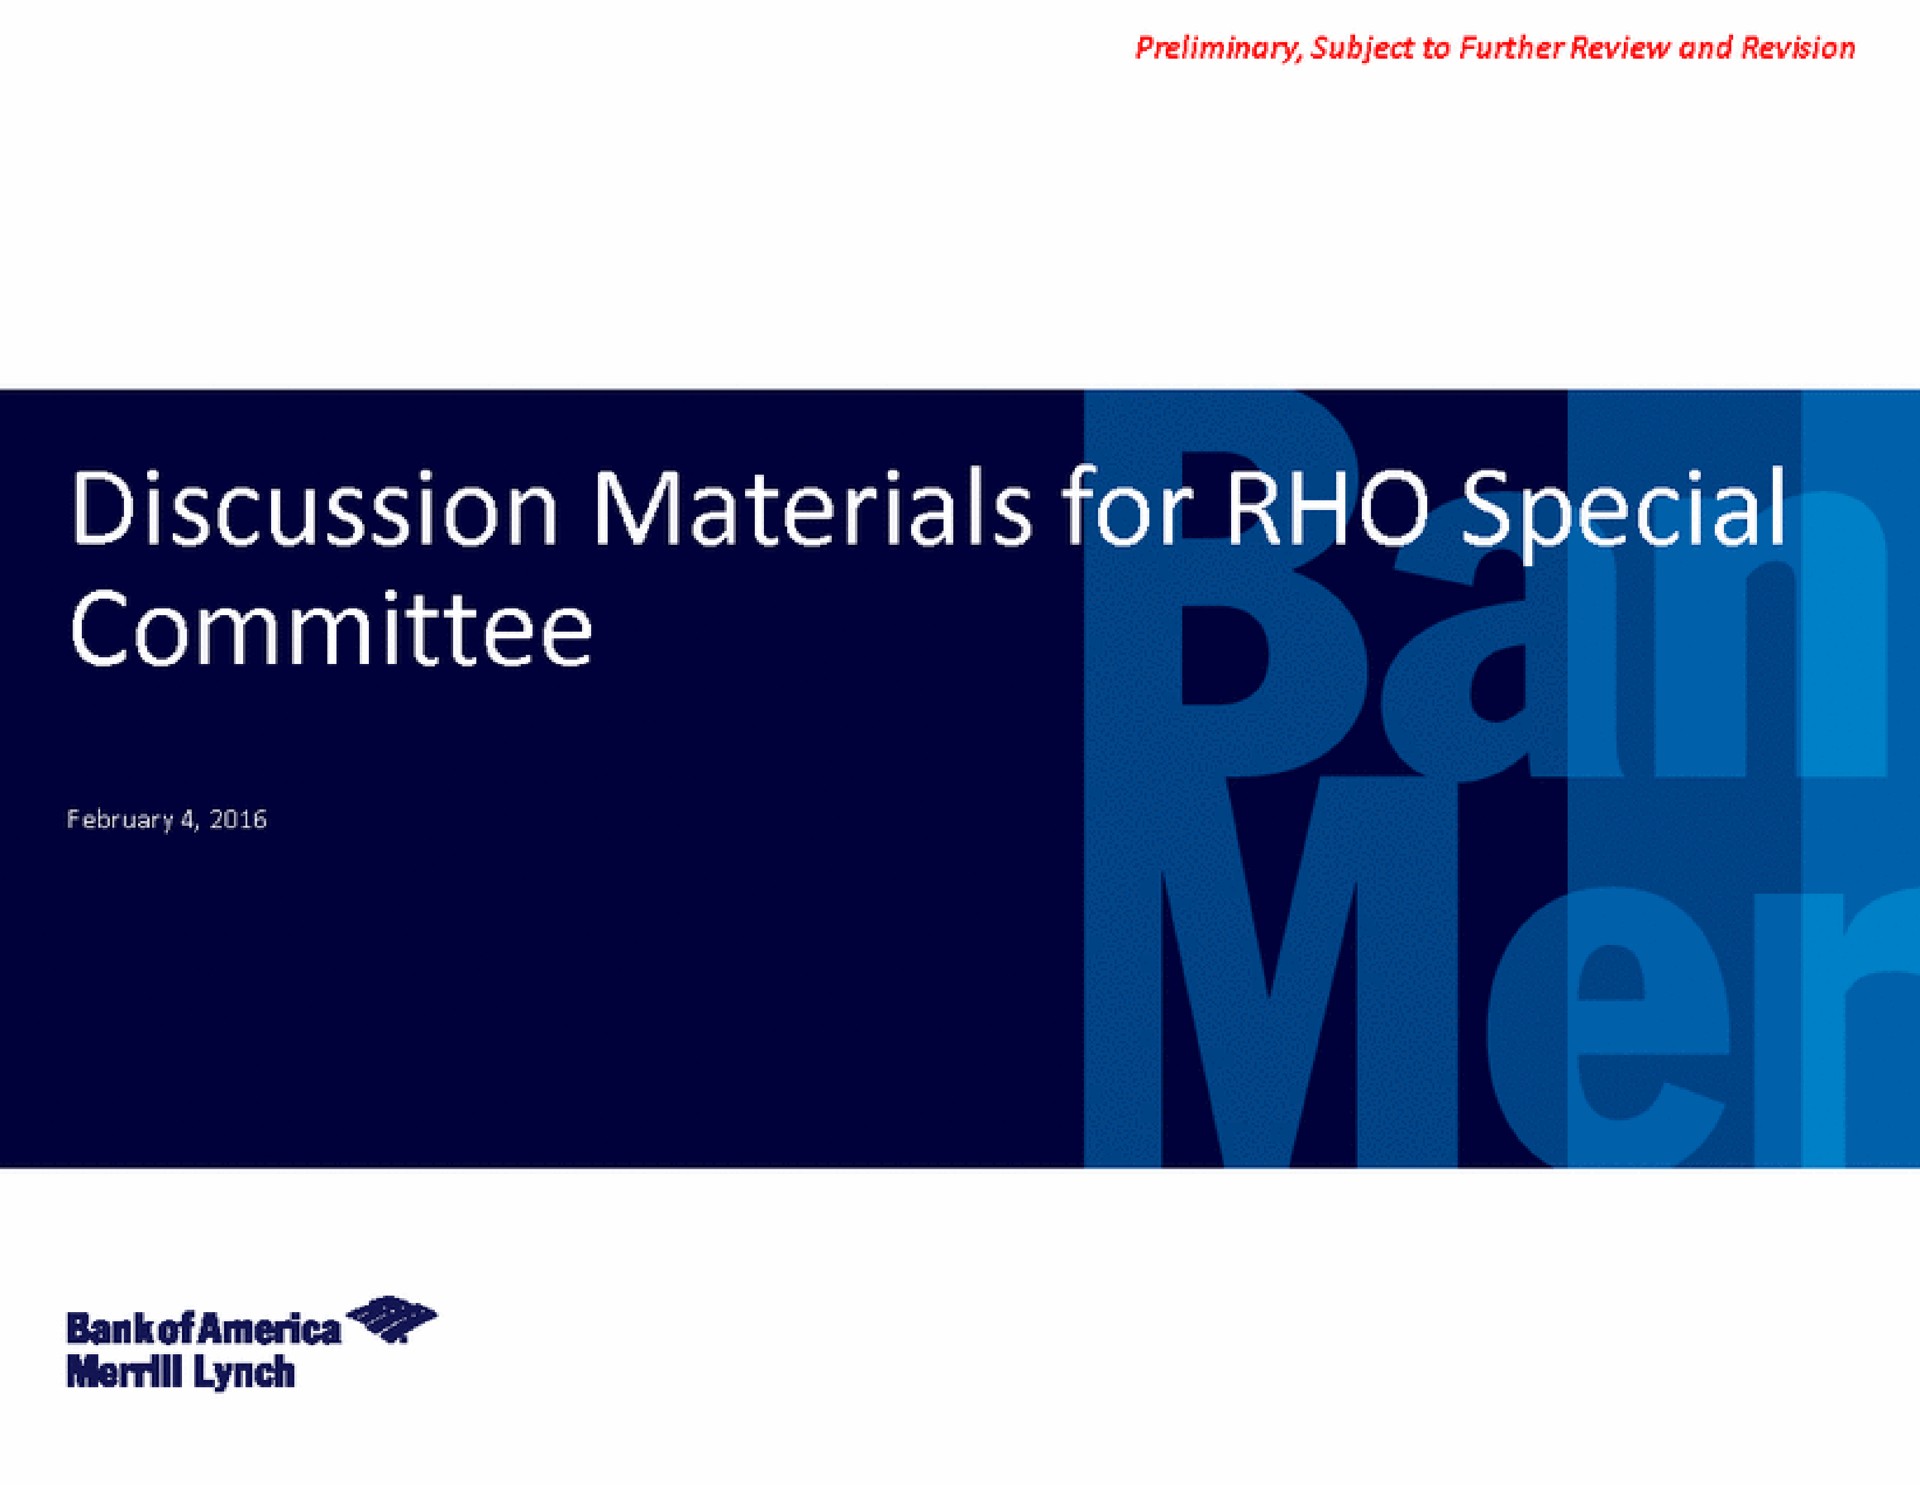 discussion materials for rho special committee lynch | Bank of America